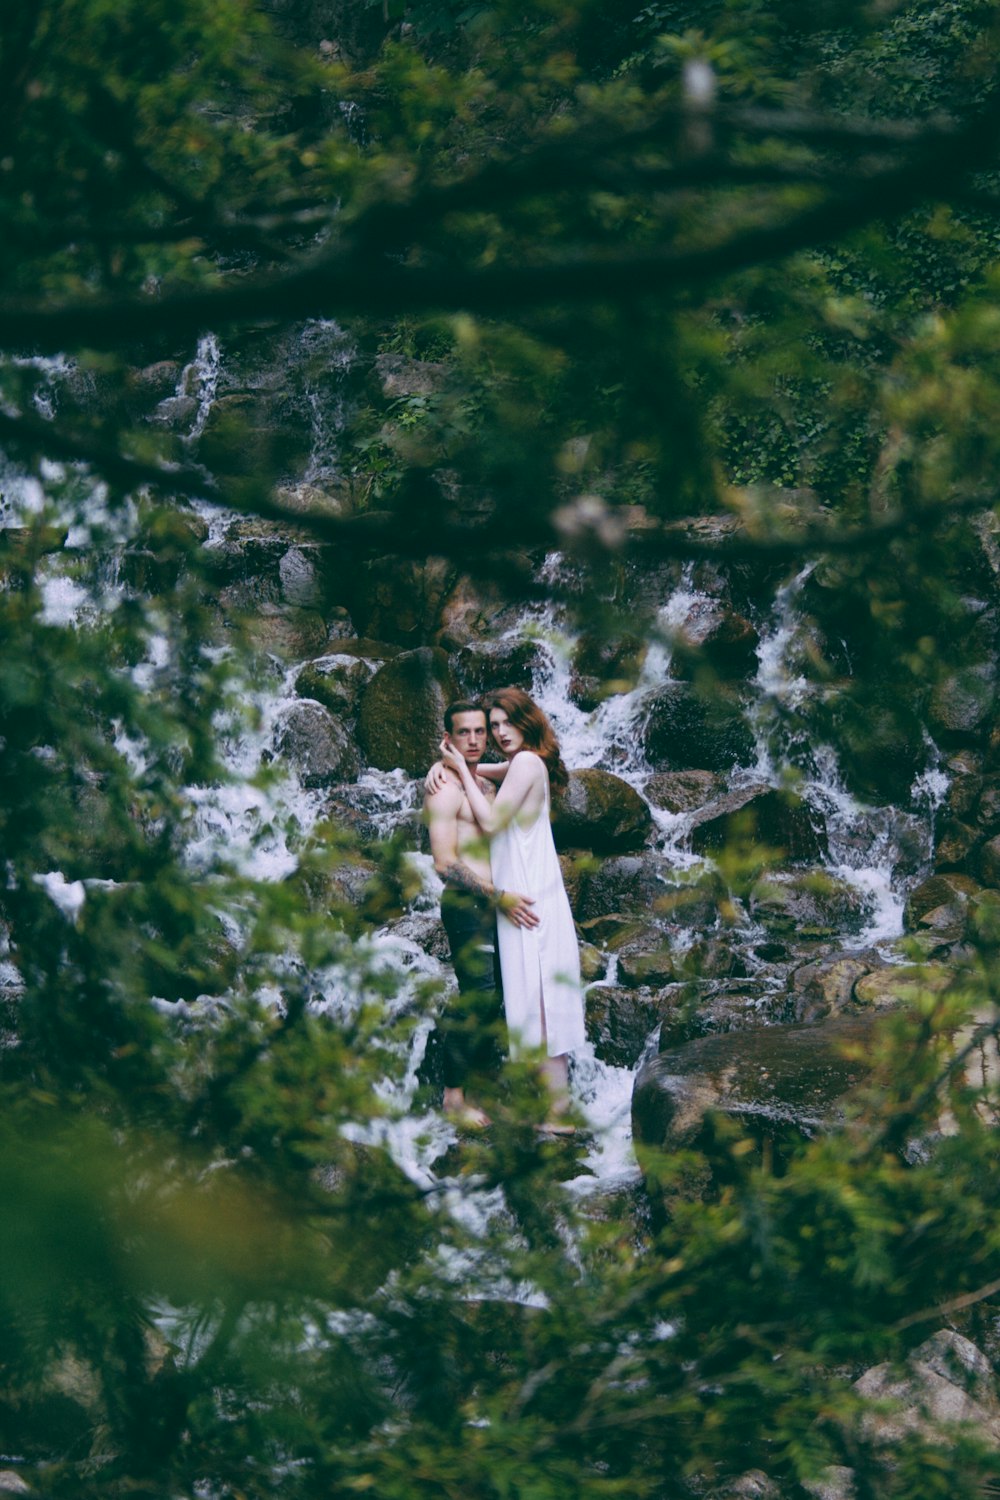 man and woman hugging on running water surrounded by rocks